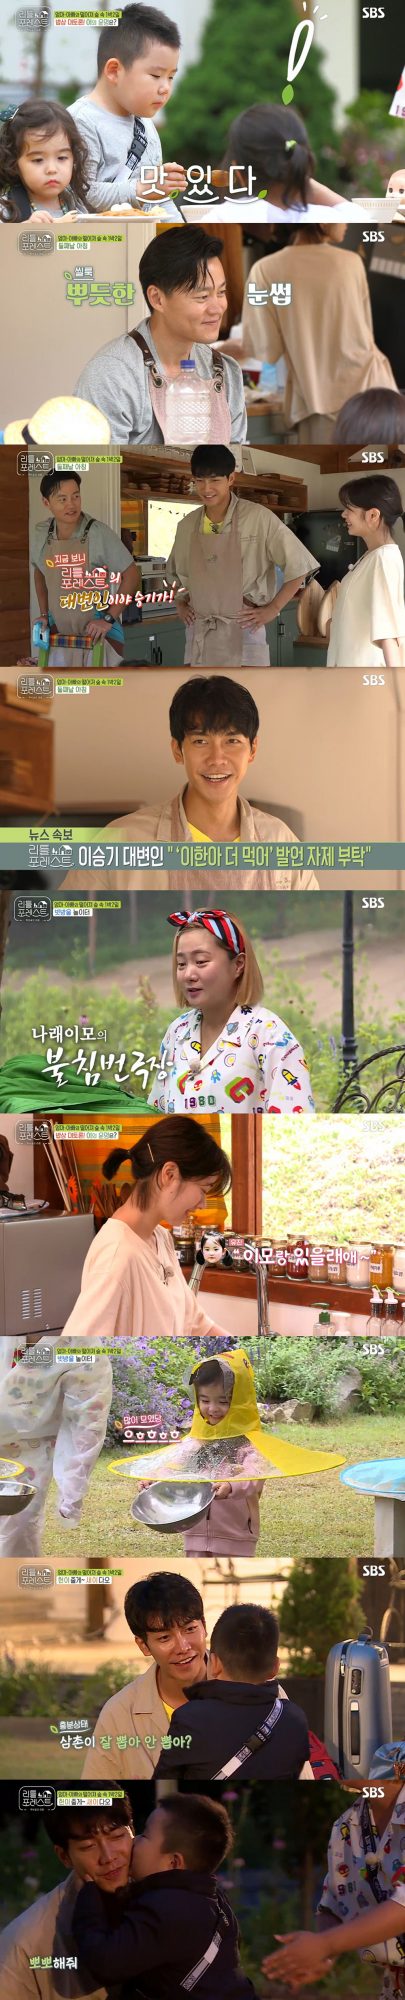 Little Forest, which aired on the 21st, rose to the highest Per minute audience rating of 7.4% (based on Nielsen Korea metropolitan area households).Little people who spent the second day in the shoots felt the taste of nature by eating fresh blueberries directly from the garden with Lee Seung-gi.Lee Seo-jin prepared beef soup, mackerel grilled and little kimbap for breakfast for the children.Littles loved Lee Seo-jins dishes, including asking for more mackerel grilling.Lee Seung-gi also took office as the official Spokesman of the tempo.Lee Seung-gi quickly took Lee Han to the bathroom when Lee Han, who was eating rice, quietly said he wanted to see a big thing.Lee Seo-jin laughed at Lee Seung-gi, who was in charge of the childrens excretions, saying, Spokesman. Lee Seung-gi said, Stop.I want you to refrain from saying (to children) that you should eat more, he said, adding to the laughter.Park Na-rae, the first inviolable, woke up sleeping all night, unable to sleep in care of his children.Park Na-rae shared the hearts of parents who could not sleep at night because they were taking care of their children by conveying what happened last night.But the rain suddenly fell on her, and Brooke smiled at the adults faces in a childish expression that she would be wet with blueberries.Adults conducted a raindrop play that stimulated the childrens five senses rather than avoiding sudden rain.Littles felt the rain with their bare hands and enjoyed playing with the sound of rain.Lee Seo-jin and Jung So-min prepared an anhydrous curry for childrens lunch.While preparing the food, they talked to Little about their feelings that became more comfortable and closer.Lee Seo-jin was pleased to be close to Little, saying, Grace was hanging on me for the first time.Jung So-min recalled the night with Eugene and said, All the hardships and fatigue have been solved.Lee Seo-jin smiled, saying, I have to have a baby soon.Spokesman Lee Seung-gi also played a role as a tooth fairy. The bloated family members persuaded Lee Han-i to pick it up, who was constantly uncomfortable with the shaking.Lee Seung-gi approached Lee Han-yi, who was in conflict, and touched his shaking teeth and naturally pulled his teeth.Lee, who confirmed that the tooth was coolly picked, laughed brightly and proudly approached Brooke, who was in his heart.He also kissed Lee Seung-gi, a tooth fairy, and received a 100 won allowance for Park Na-rae in a praise.Lee Seung-gi, who became a tooth fairy of the bakgol, recorded a Per minute audience rating of 7.4%, accounting for the best one minute.The first parting came to the bakgol.Lee Seo-jin, Lee Seung-gi, Park Na-rae, and Jung So-min said goodbye to their parents and returned to their parents arms.Eugene whined, I do not want to go, and impressed my uncle and aunt.Next week, a new Little Boys appearance appeared in the trailer: Little Forest airs every Monday and Tuesday at 10 p.m.